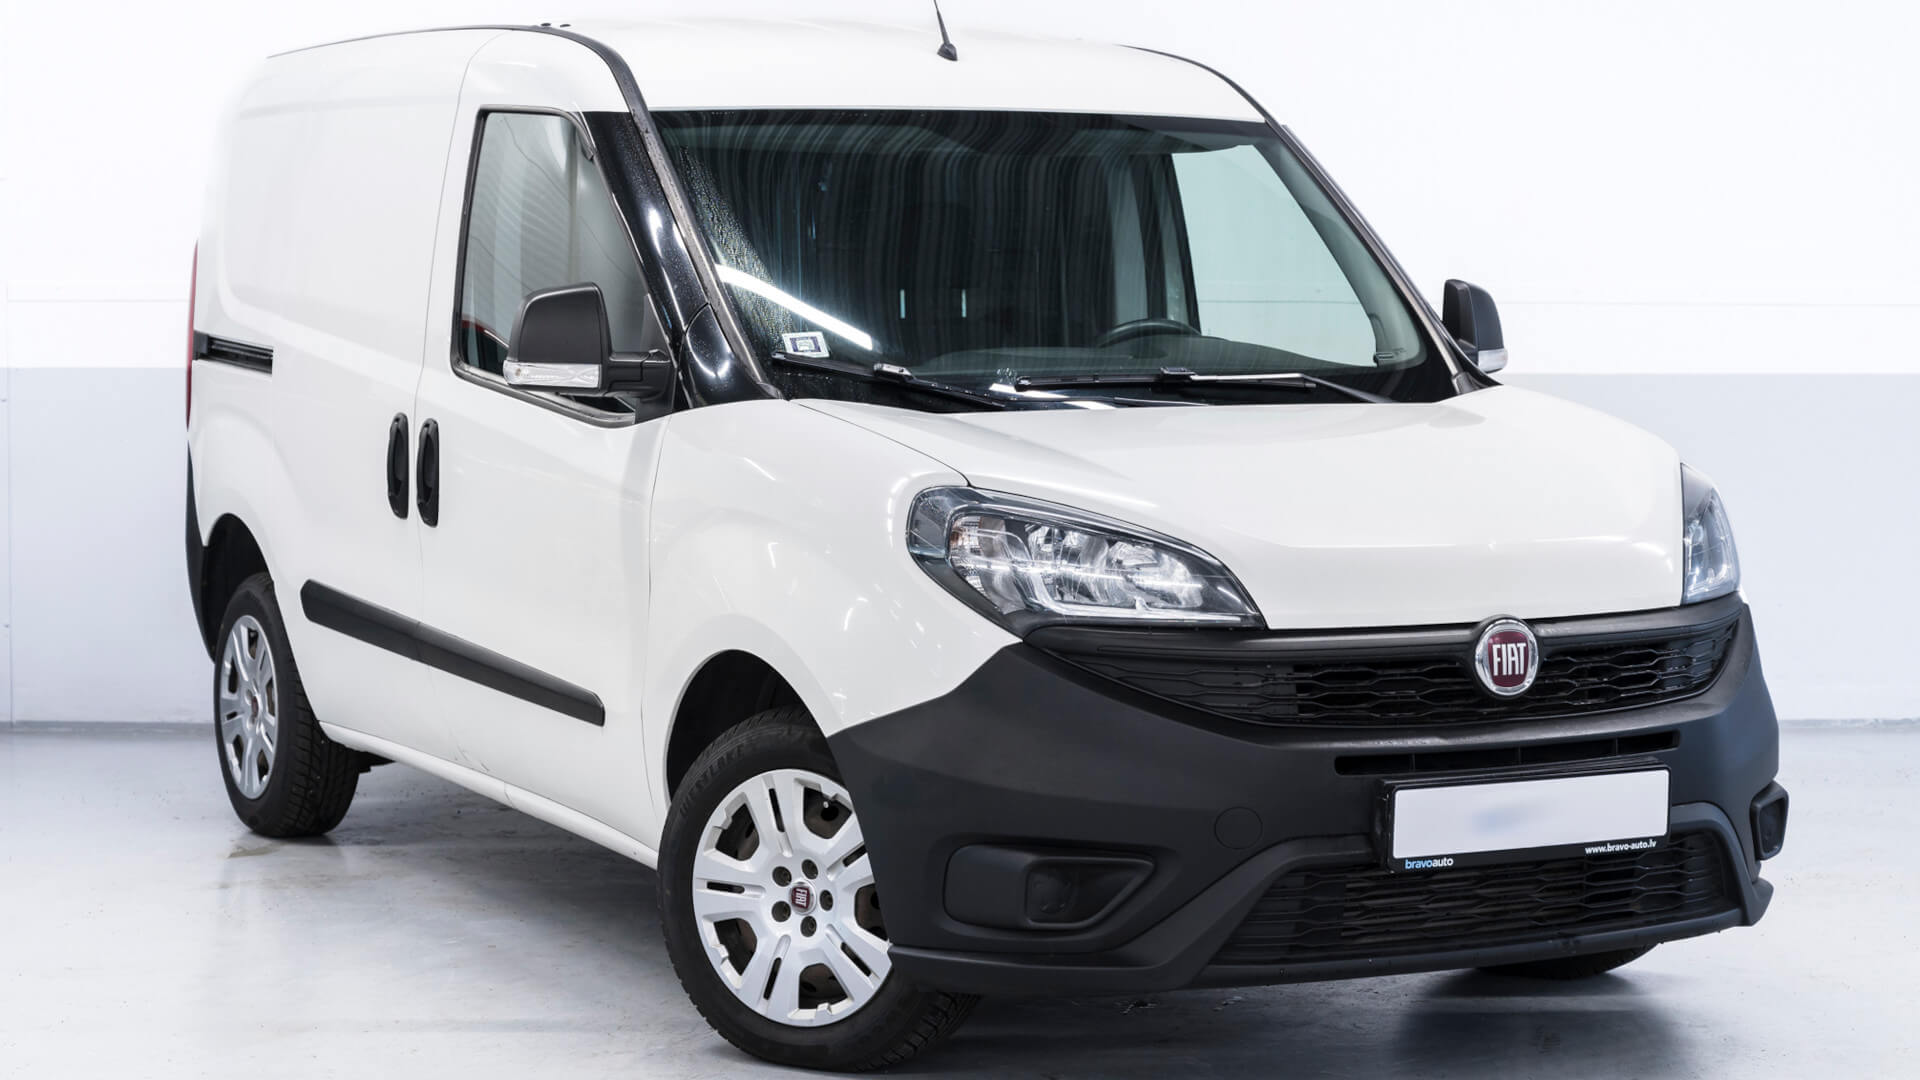 Direct4x4 Accessories for Fiat Vehicles